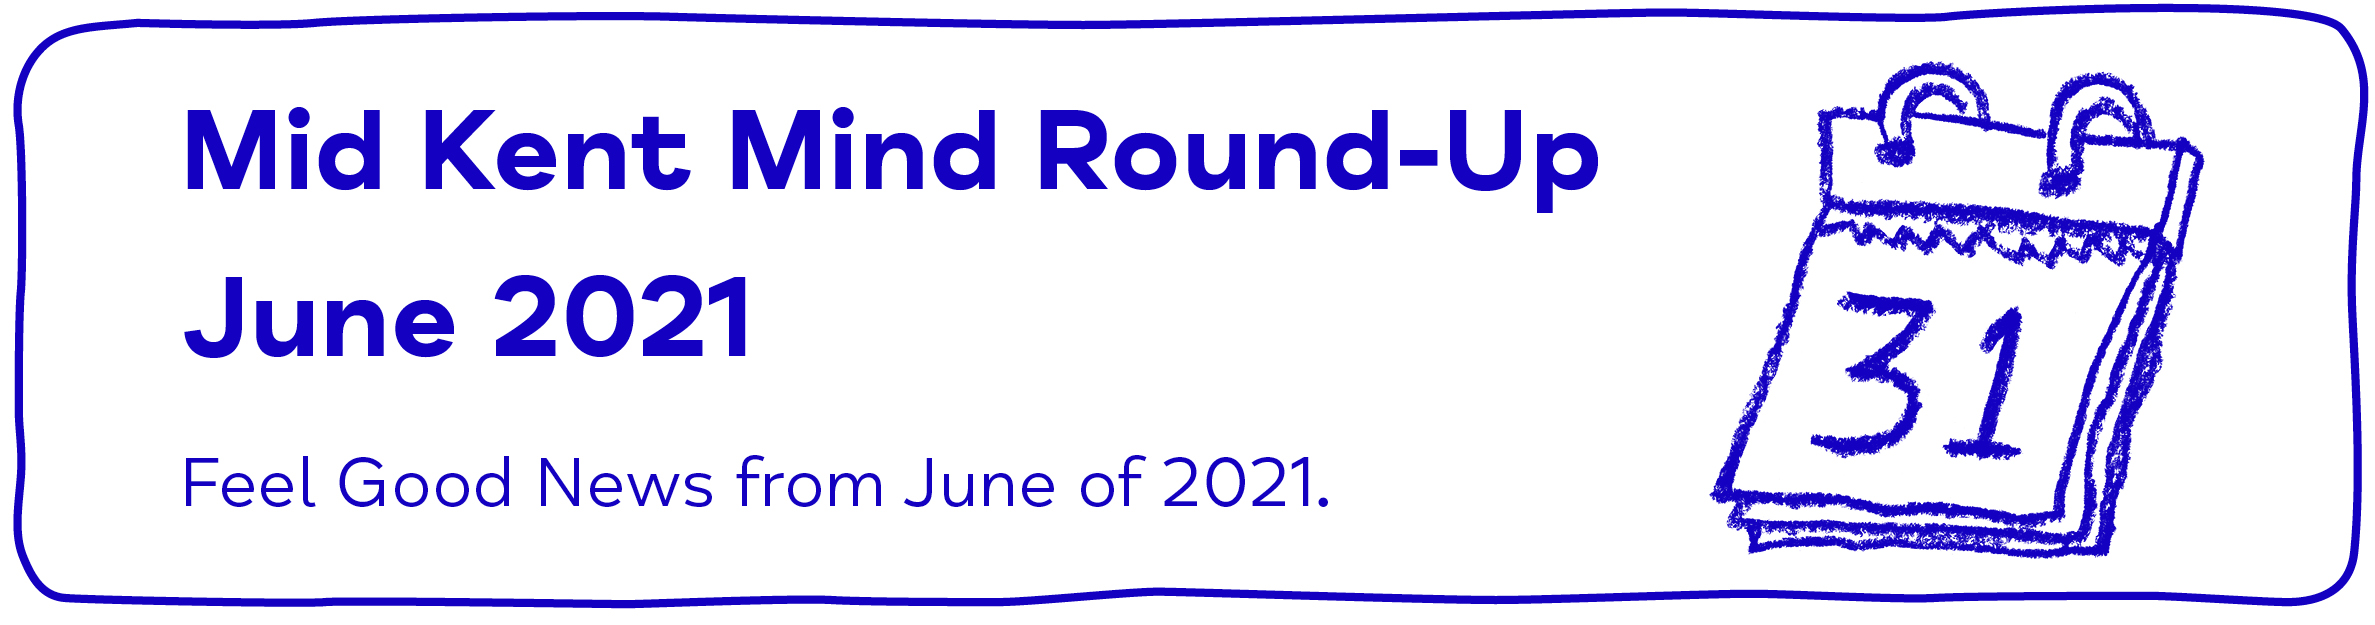 Mid Kent Mind Round-Up June 2021 Feel Good News from May of 2021 - Mid Kent Mind Newsletter - June 2021